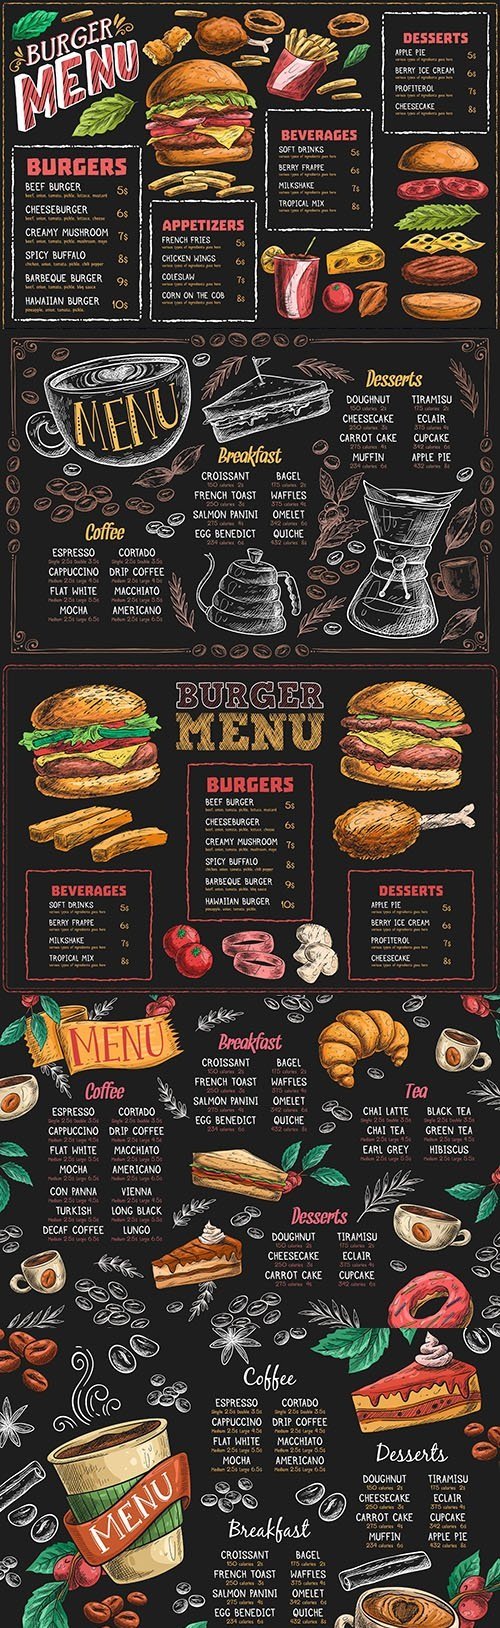 Burger menu and fragrant coffee painted design template